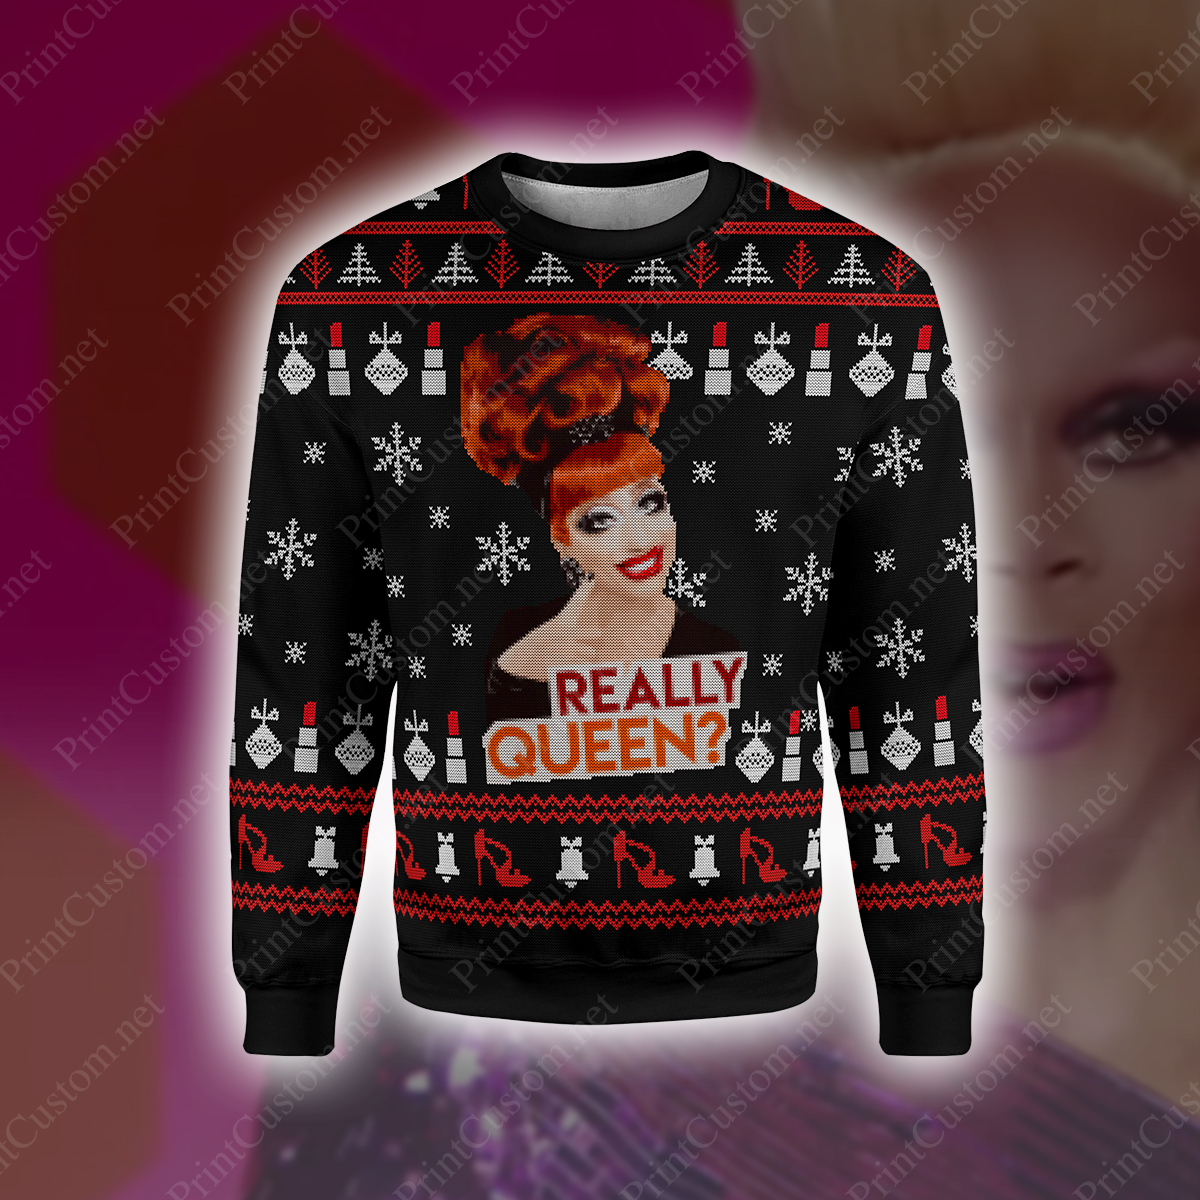 Really queen rupaul's drag race full printing ugly christmas sweater 3